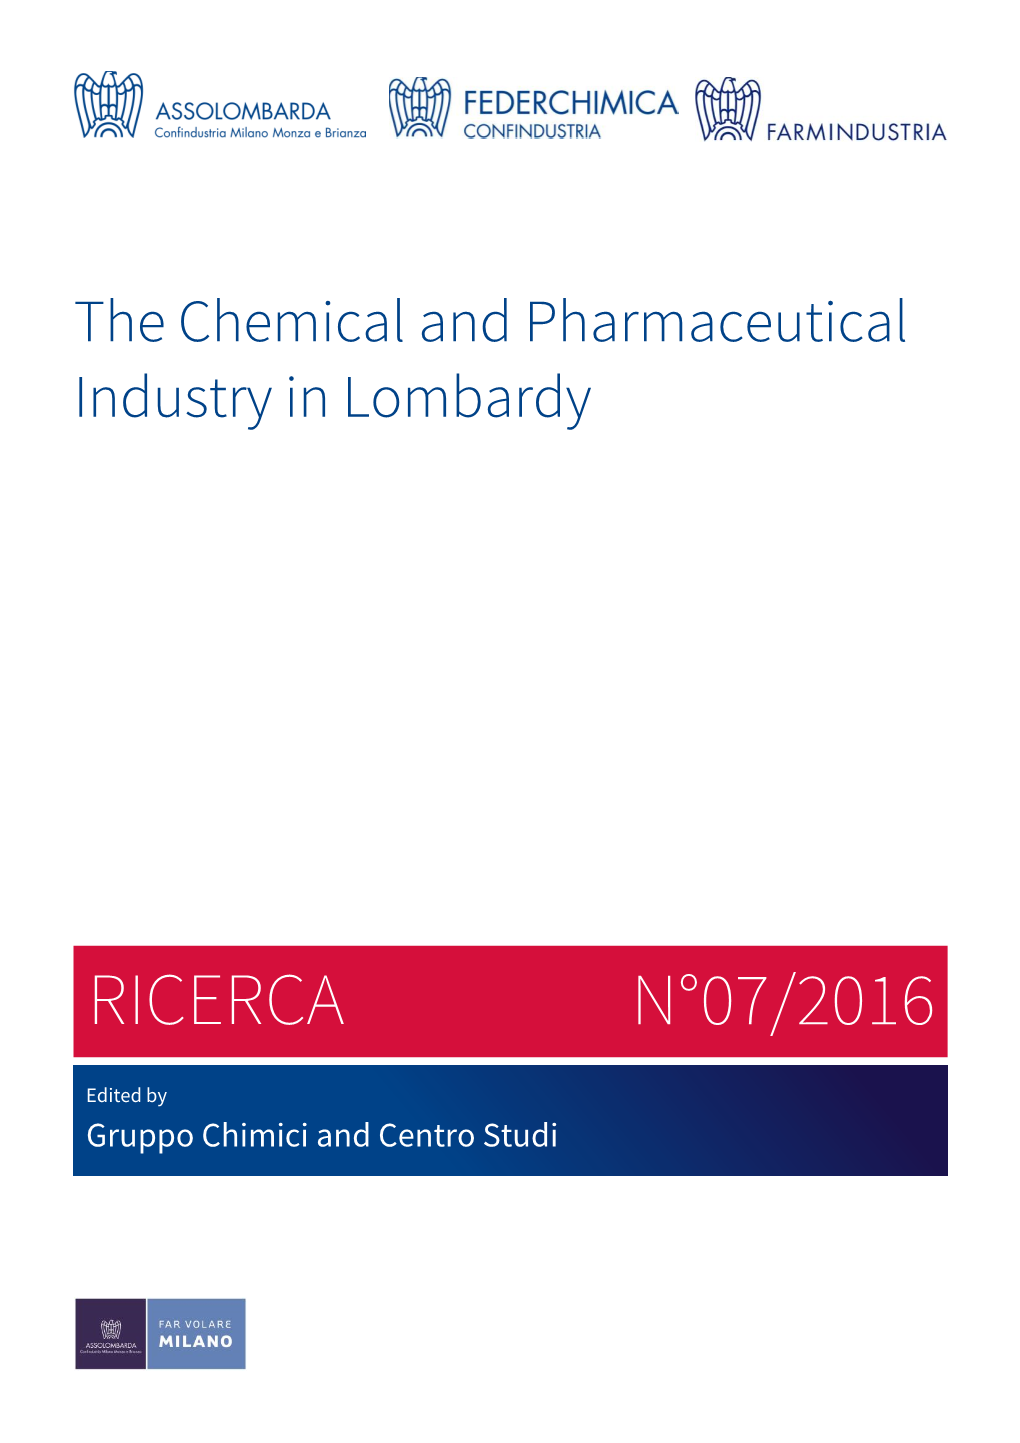 The Chemical and Pharmaceutical Industry in Lombardy